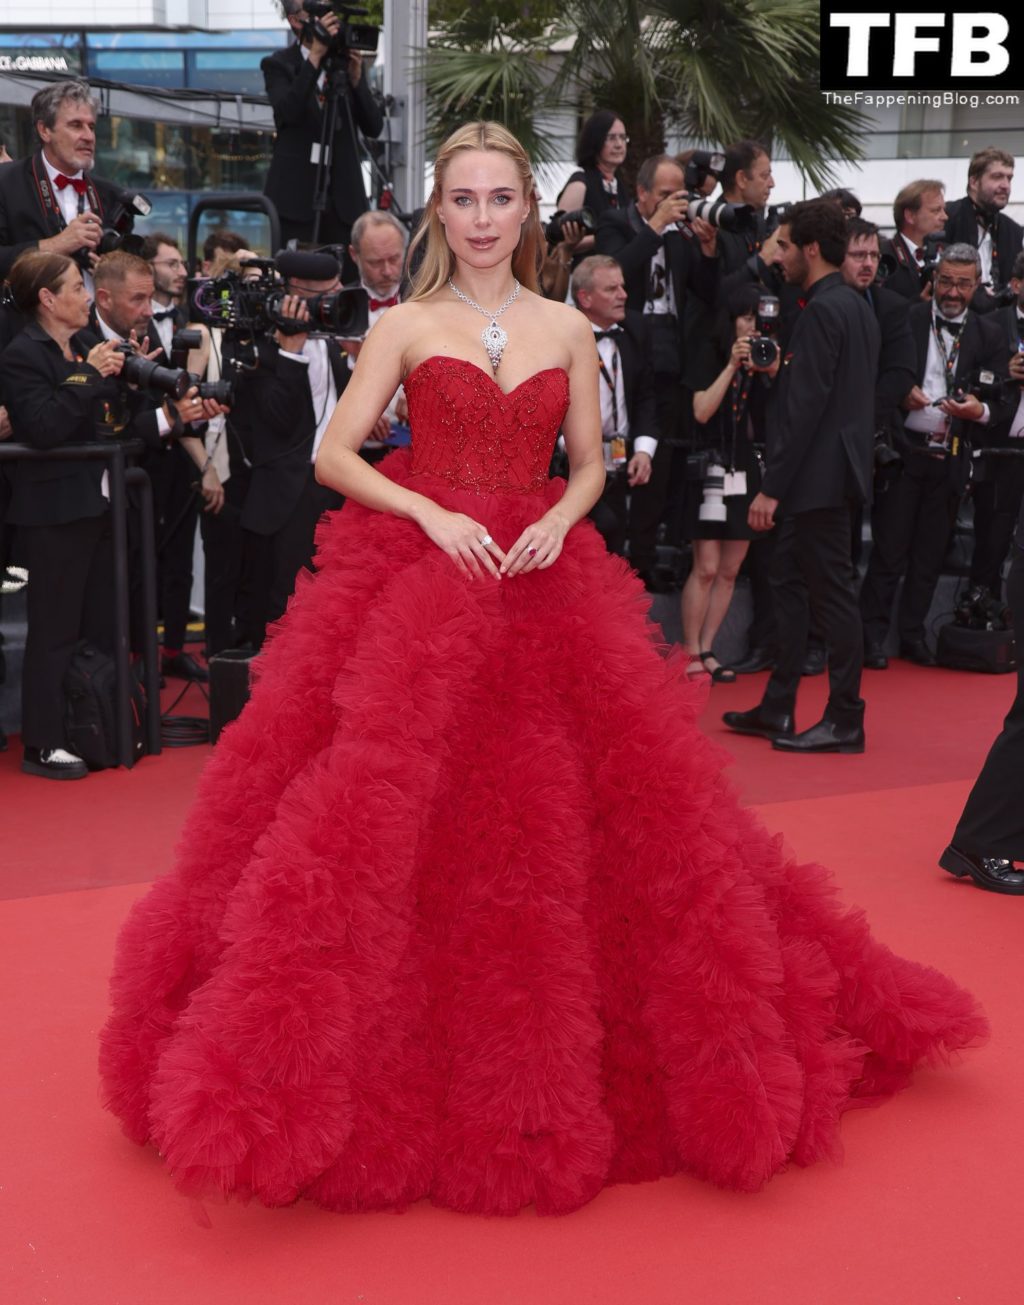 Kimberley Garner Sexy The Fappening Blog 64 1024x1305 - Kimberley Garner Looks Hot in a Red Dress at the 75th Annual Cannes Film Festival (134 Photos)